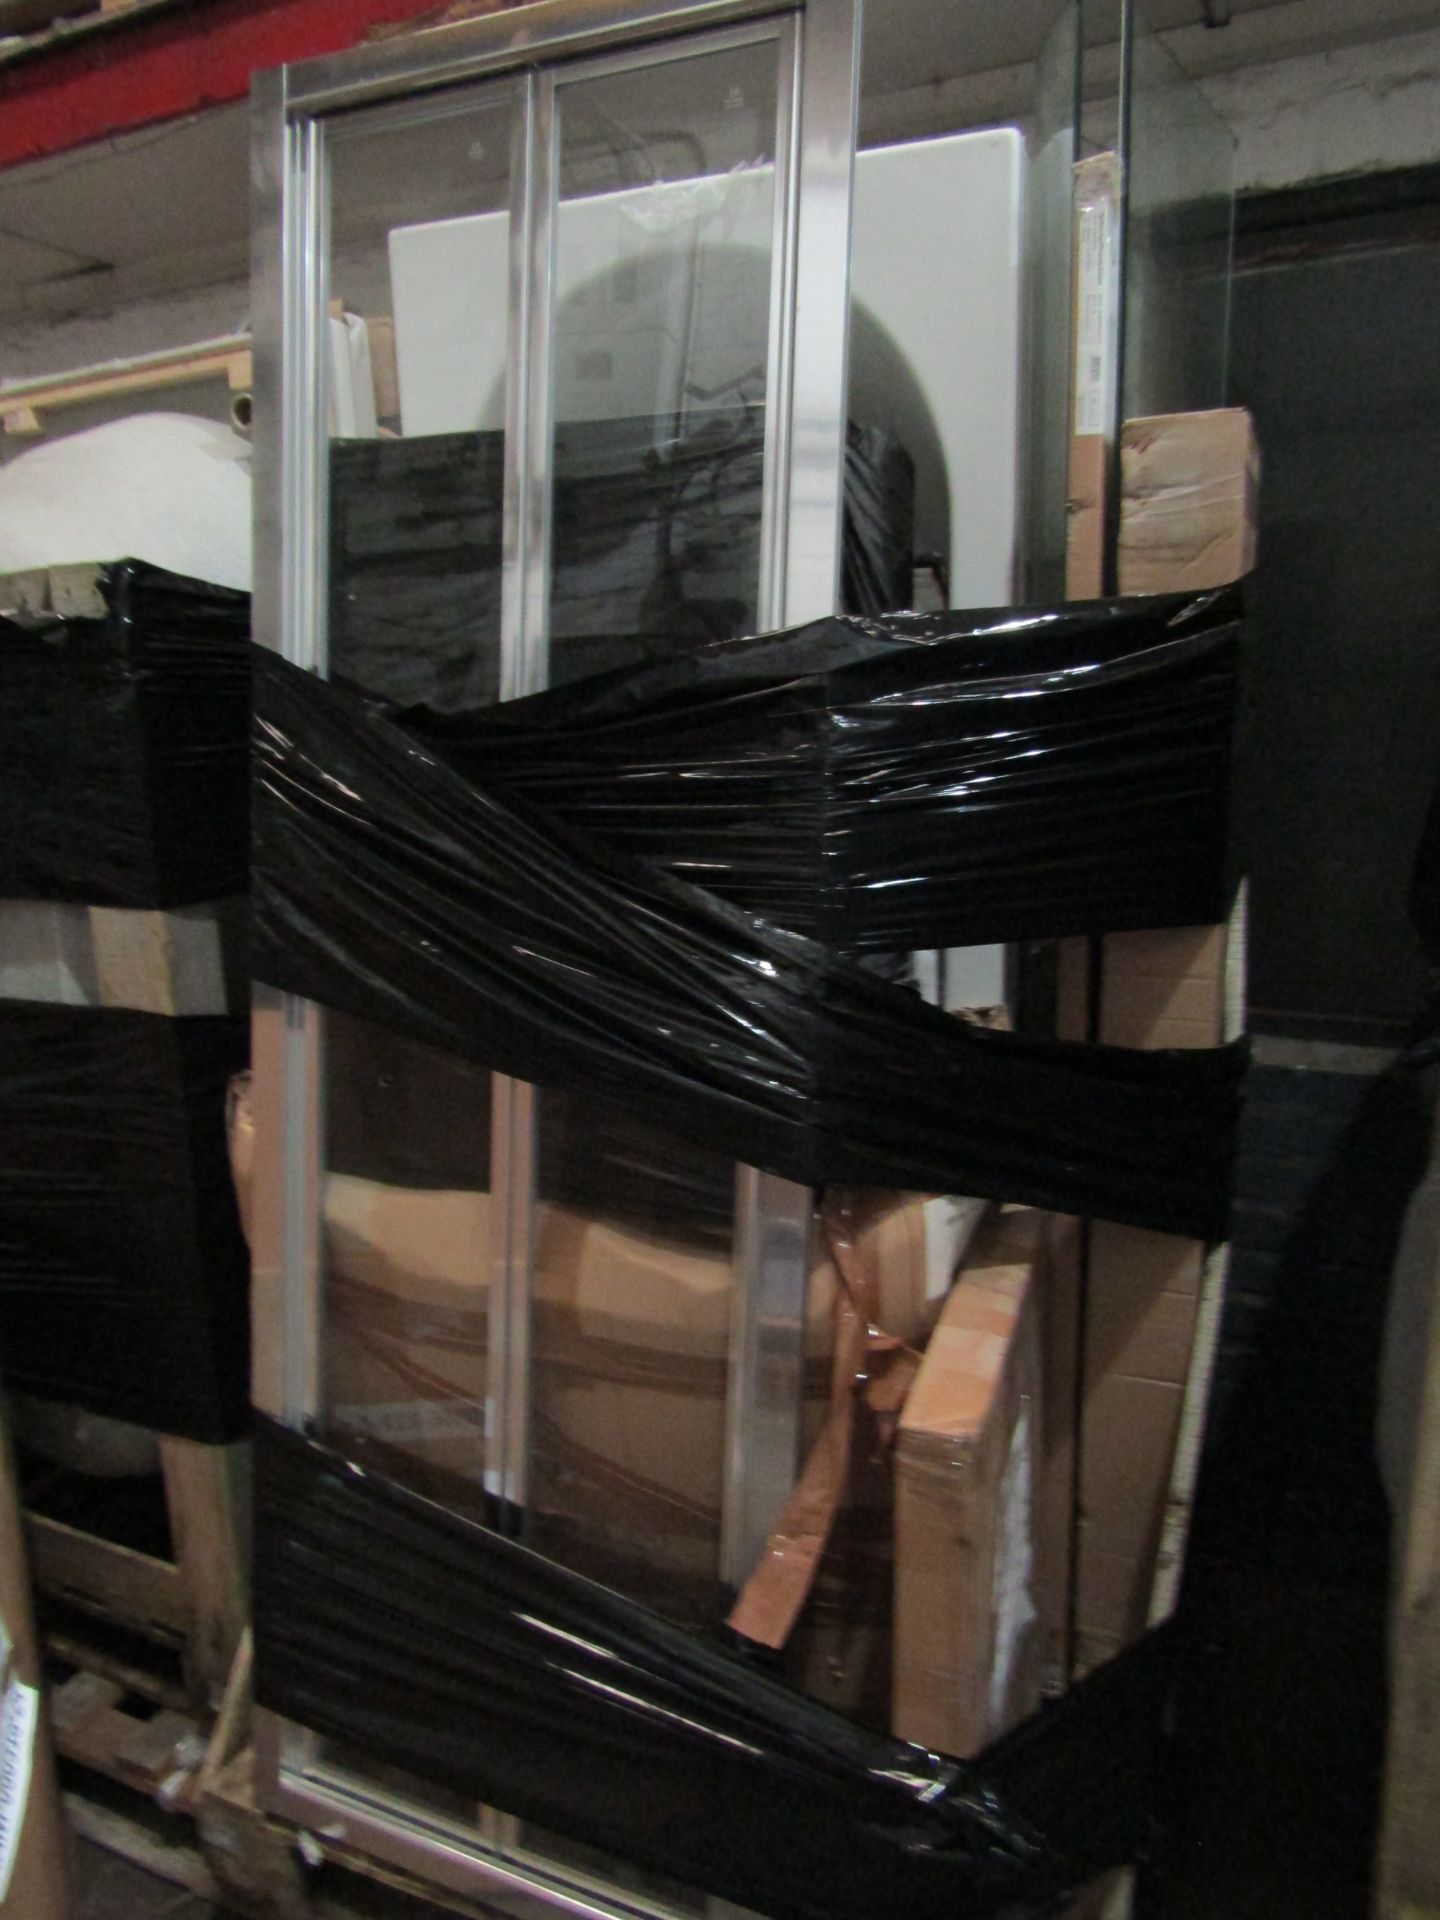 3x Pallets containing bathroom items such as showe screens, approx 6x baths, shower trays and more. - Image 2 of 3